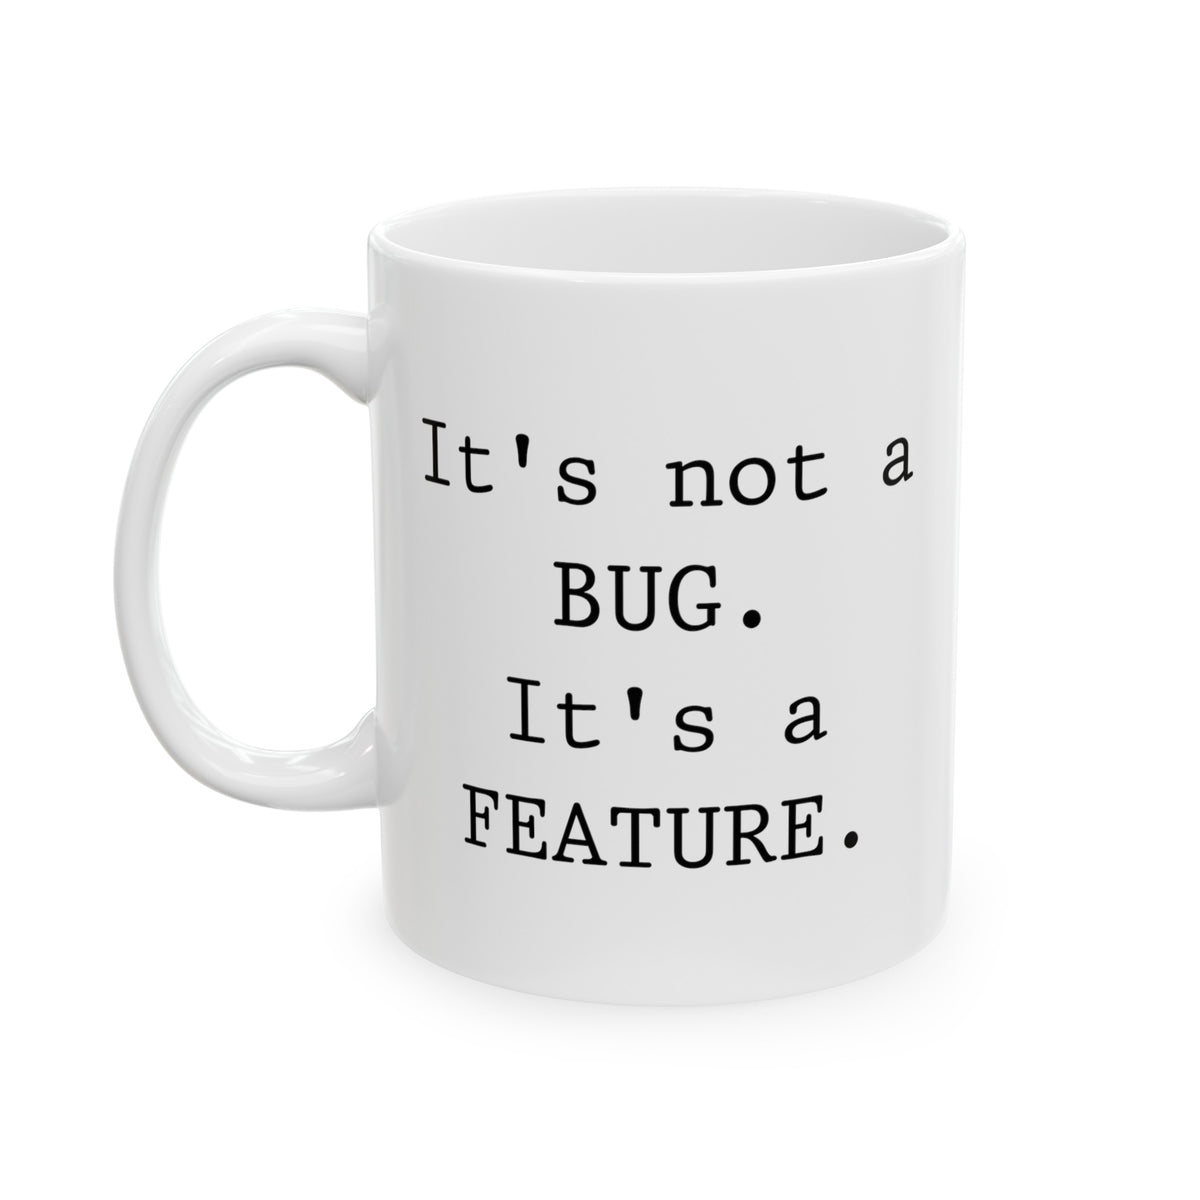 Coding Coffee Mug - It's not a bug. It's a feature Cup - Funny Programming Gifts and Sarcasm